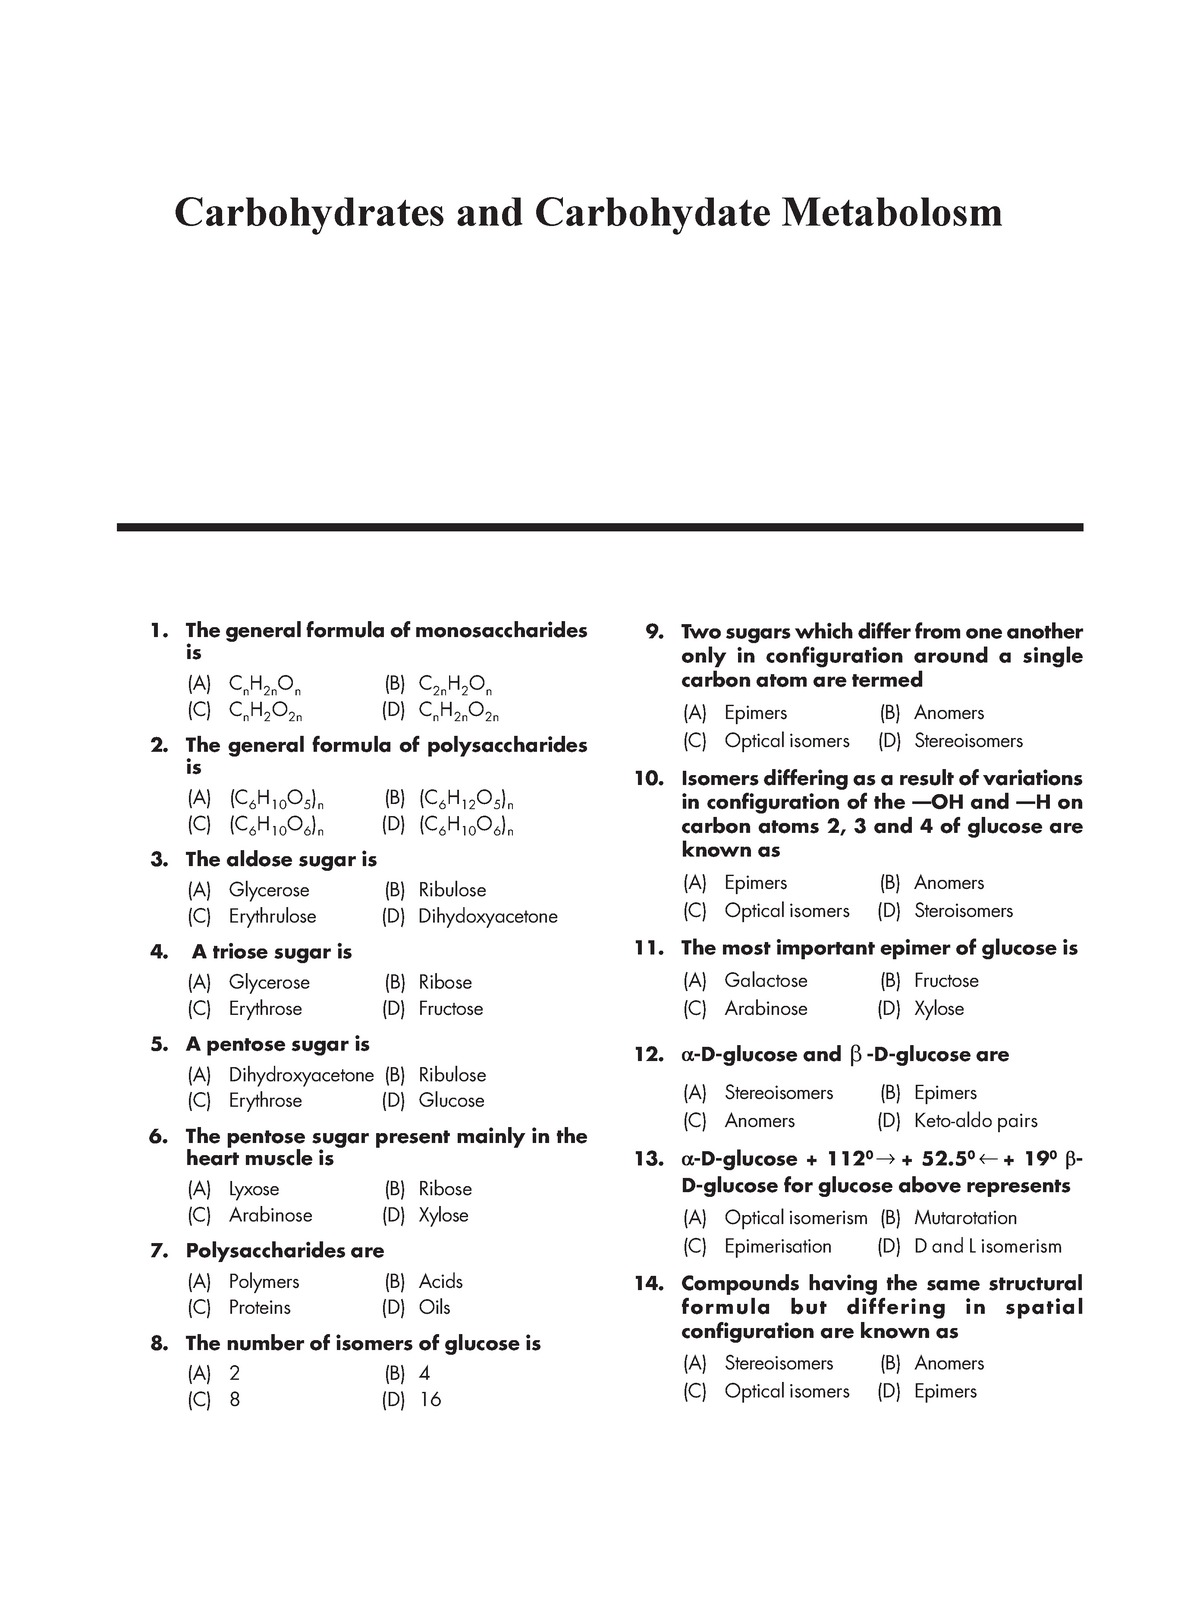 biochemistry essay questions and answers on carbohydrates pdf